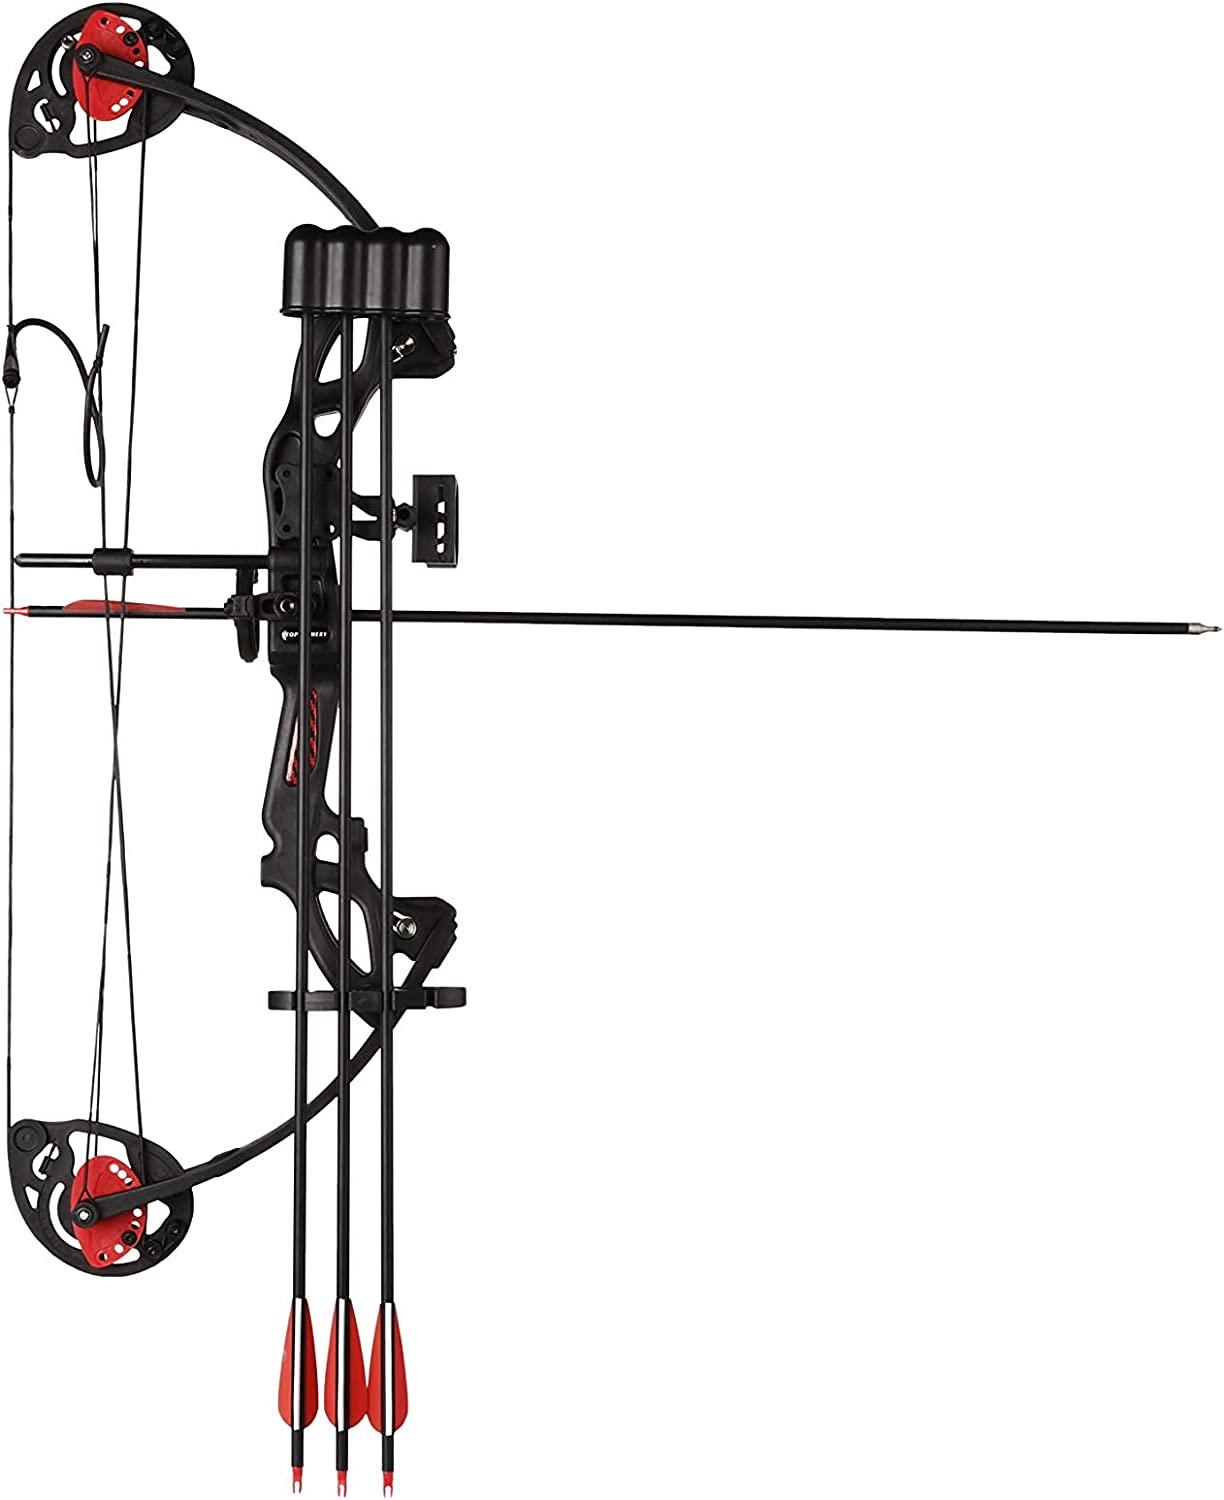 PANDARUS Compound Bow Archery for Youth and Beginner, Right/Left